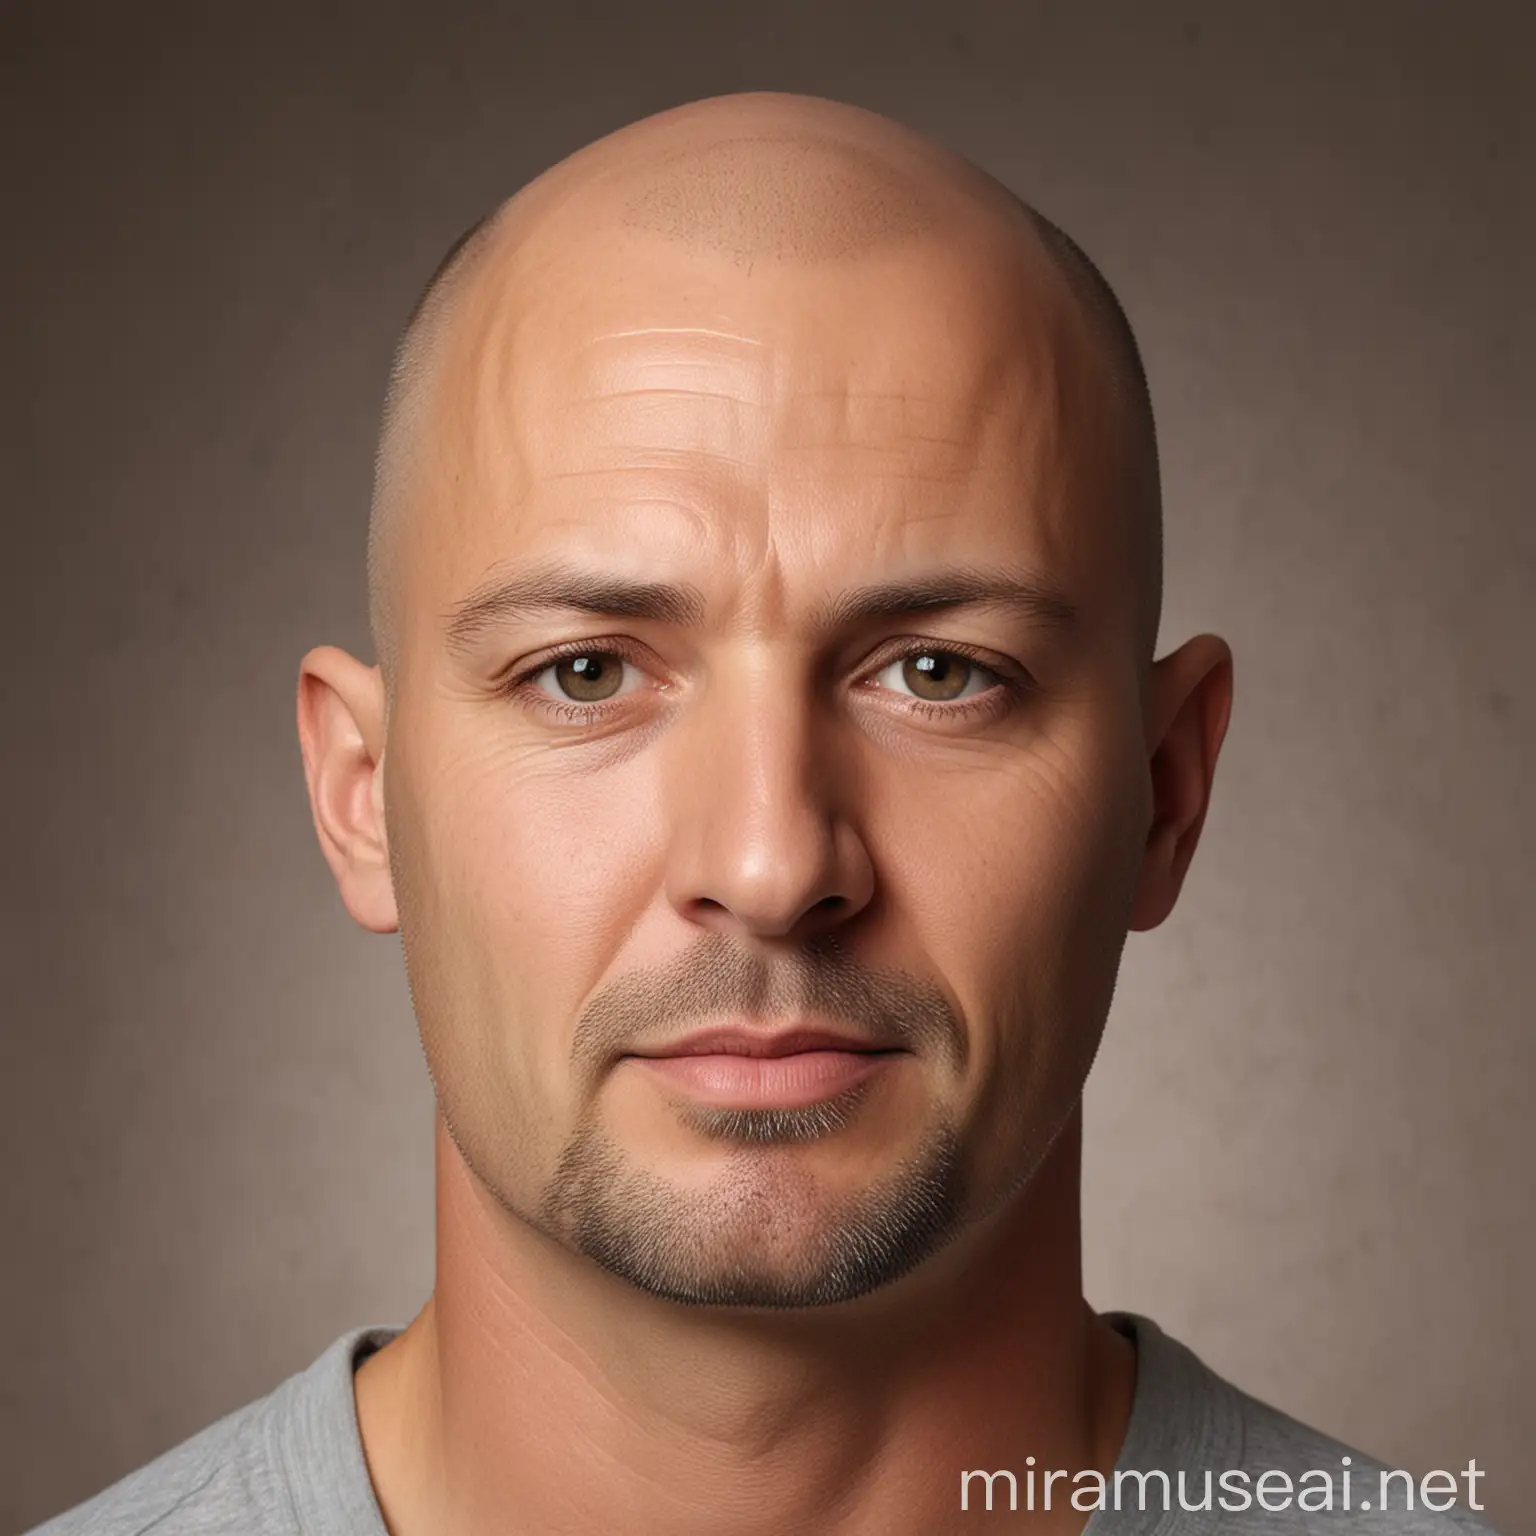 make a pic of a man, almost no hair, round head, 45 years old. 